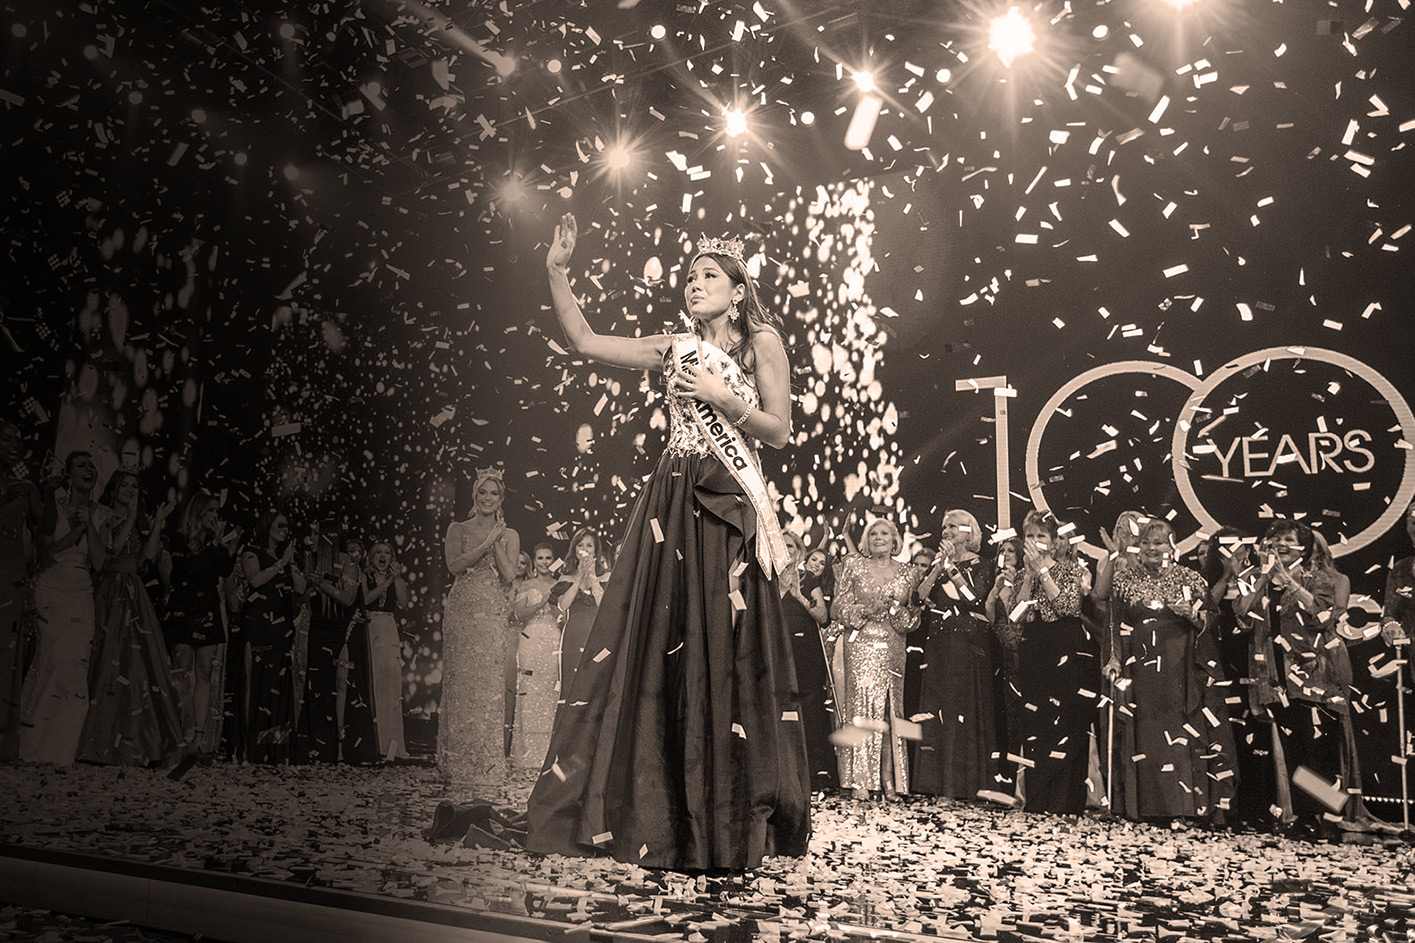 Miss America 2022 Emma Broyles Crowning moment with confetti streaming down upon her